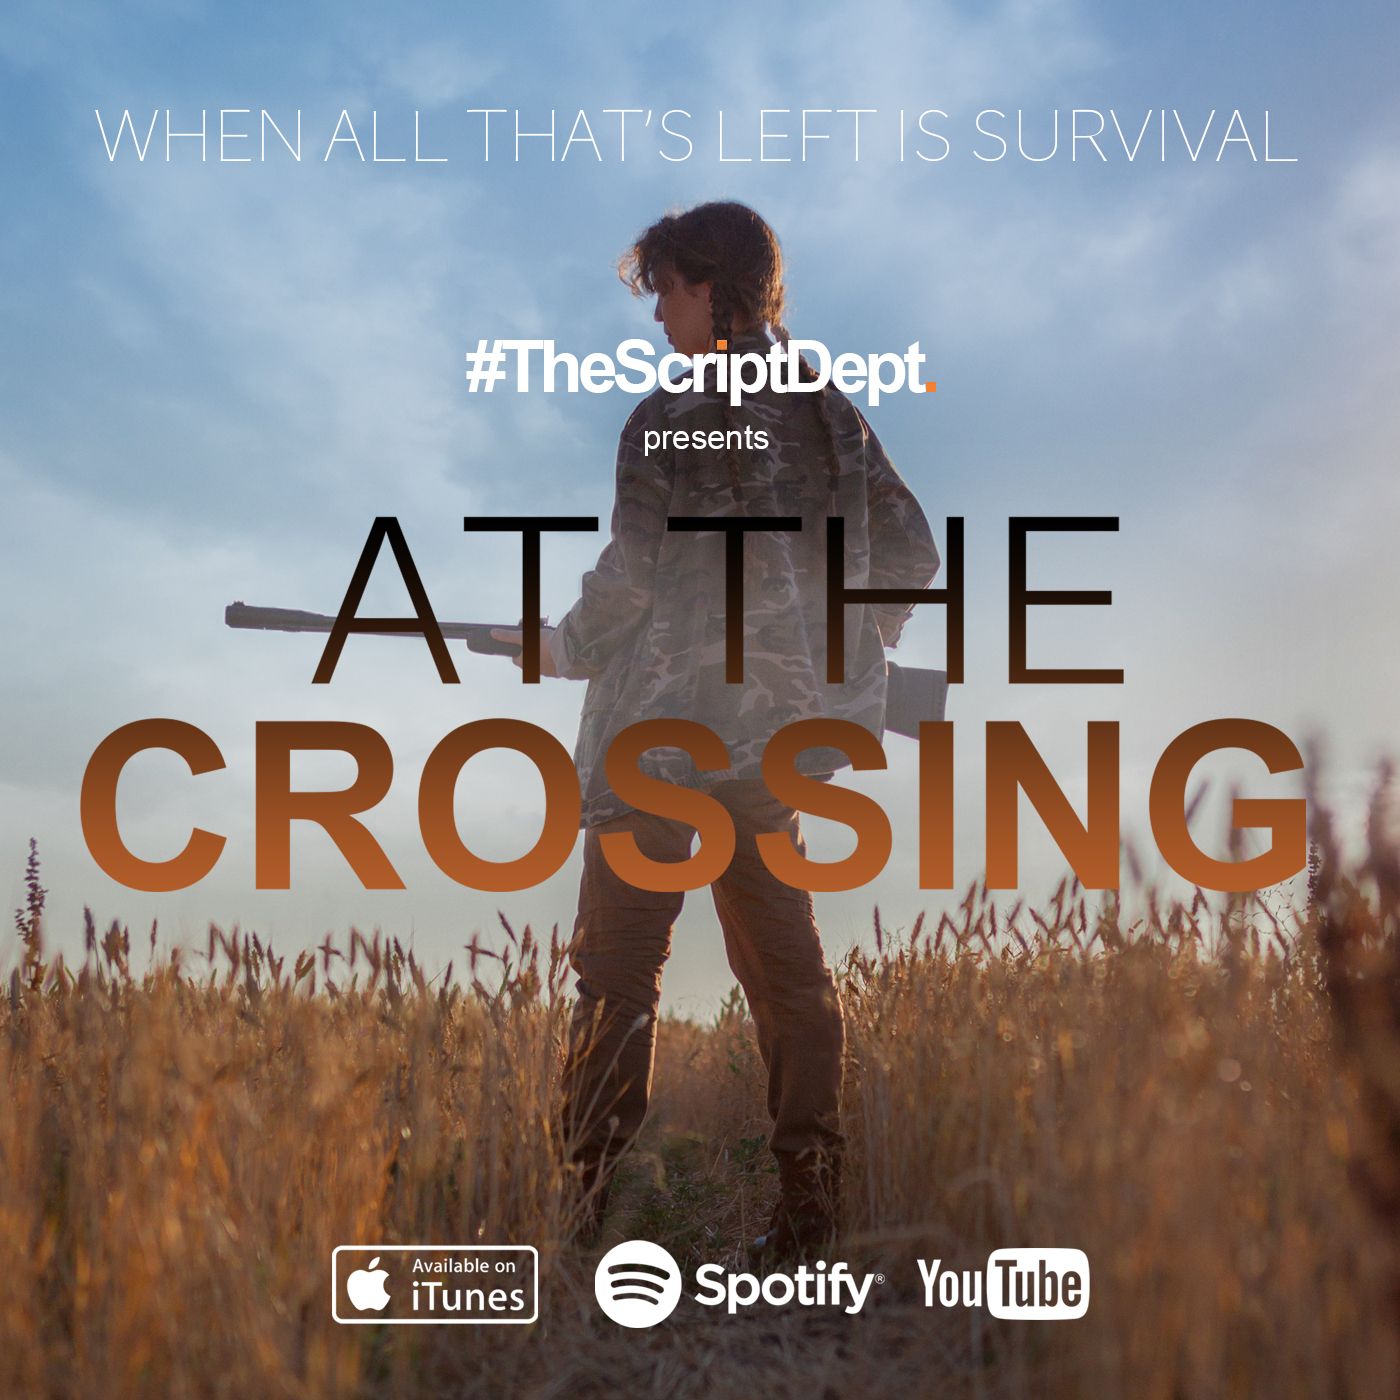 At the Crossing | Coming of Age Drama